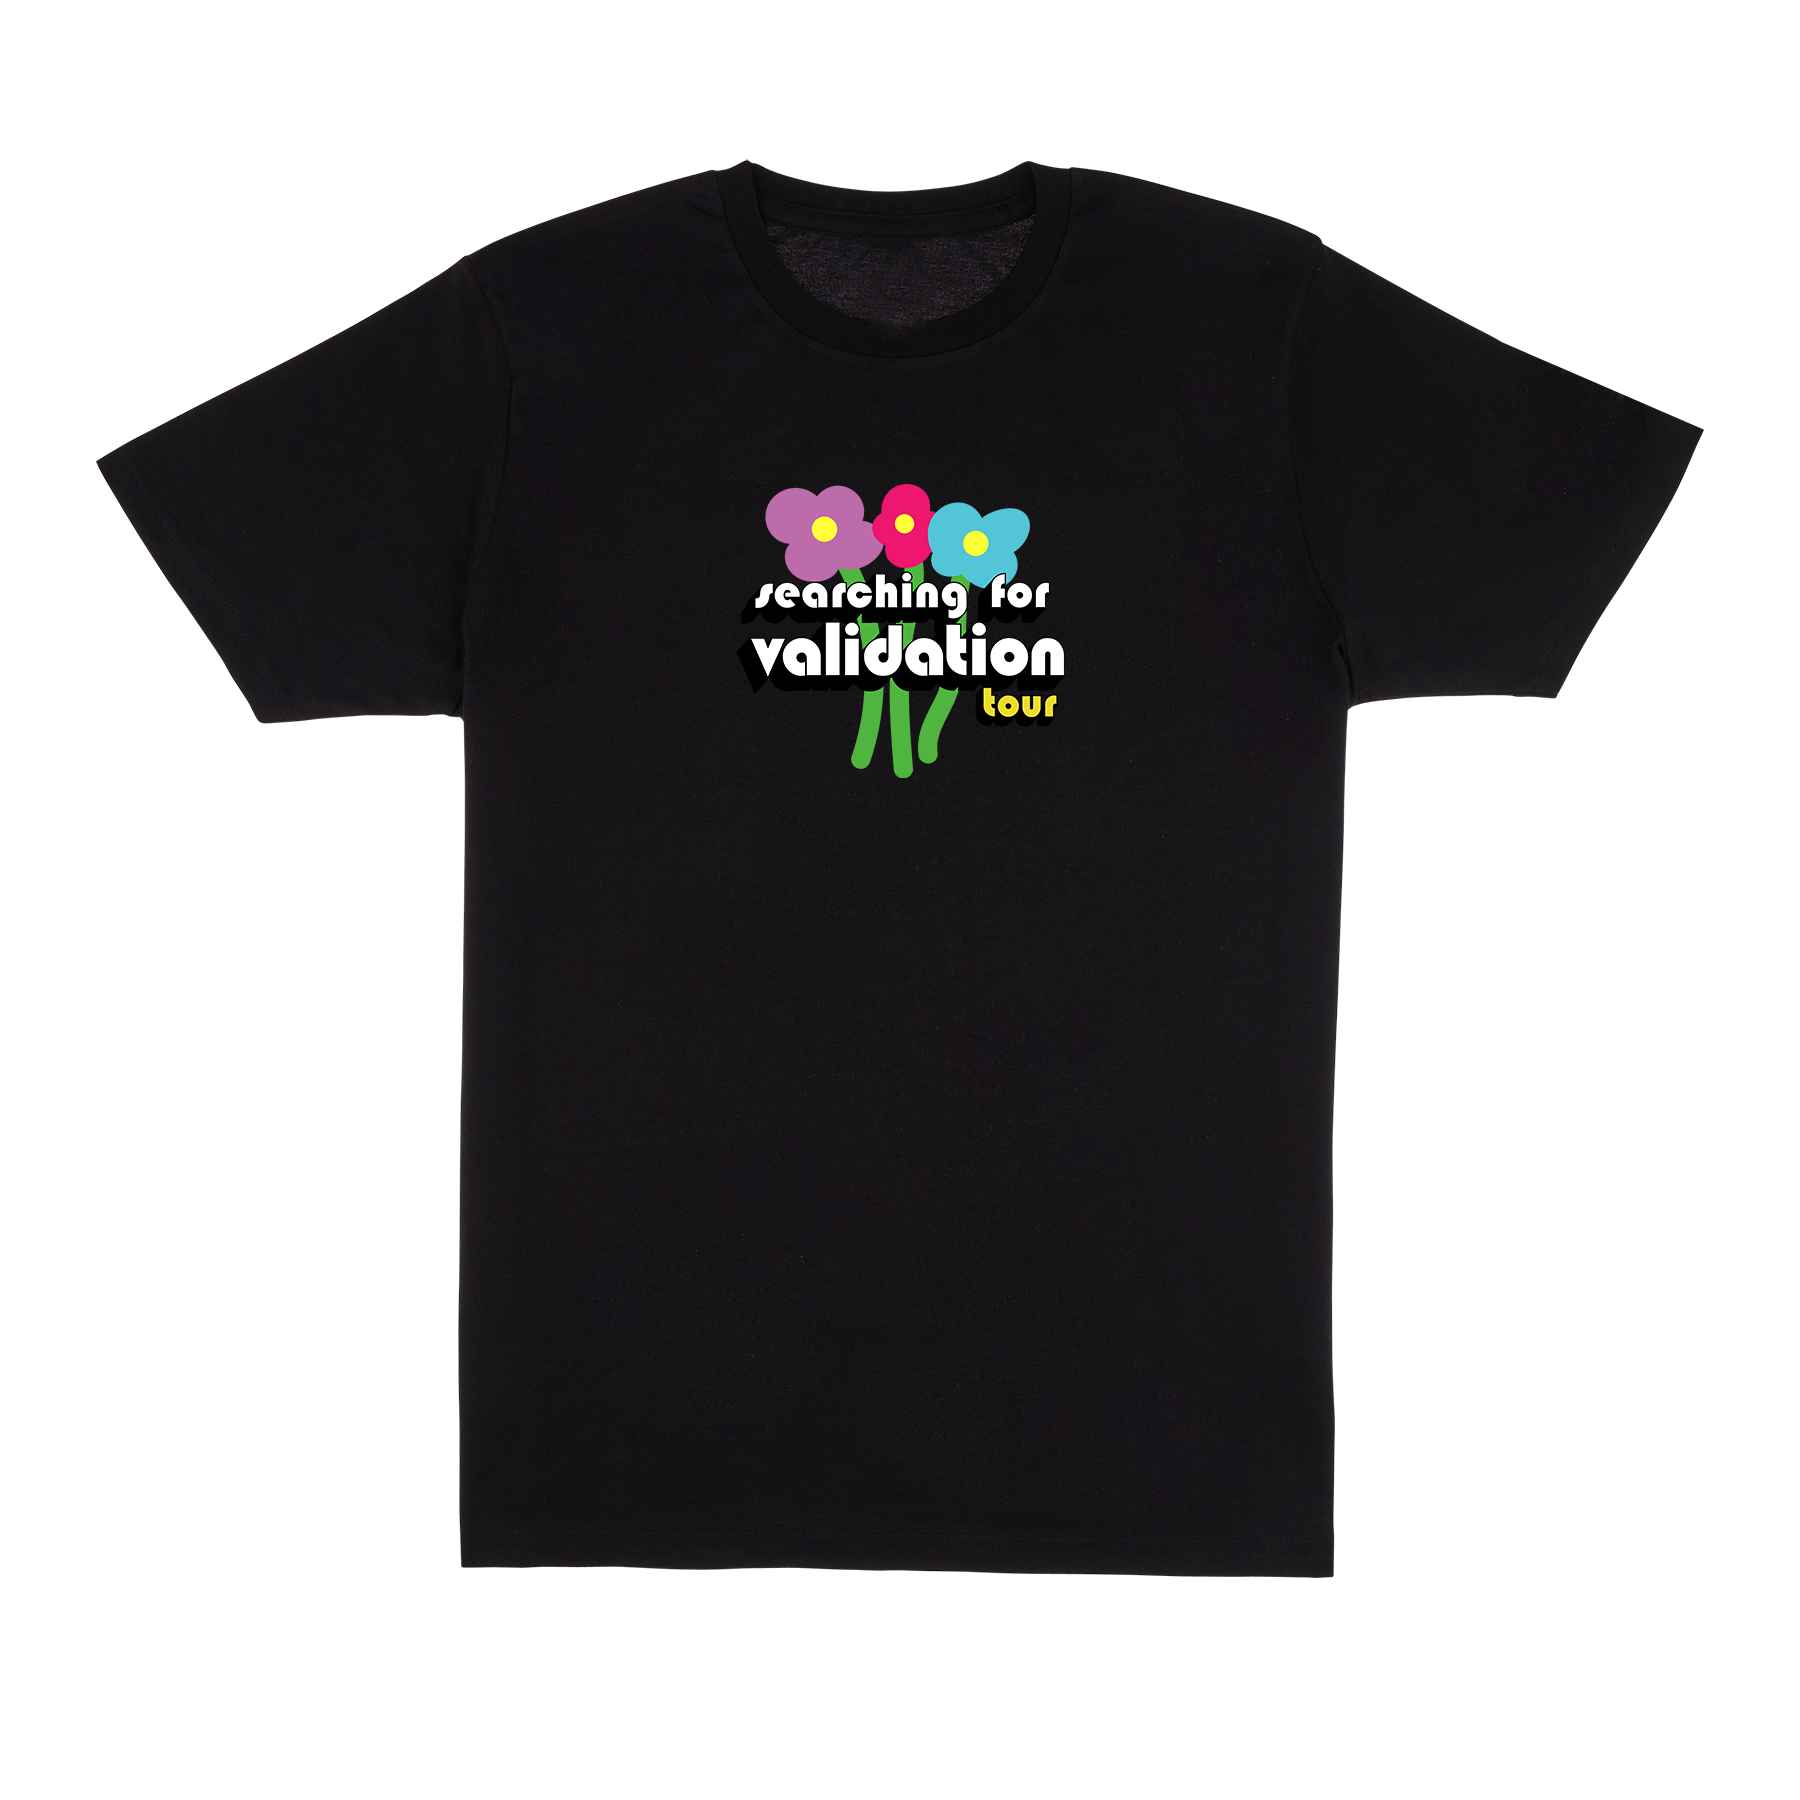 Michael Aldag - Searching for Validation Exclusive Tour Black T-Shirt